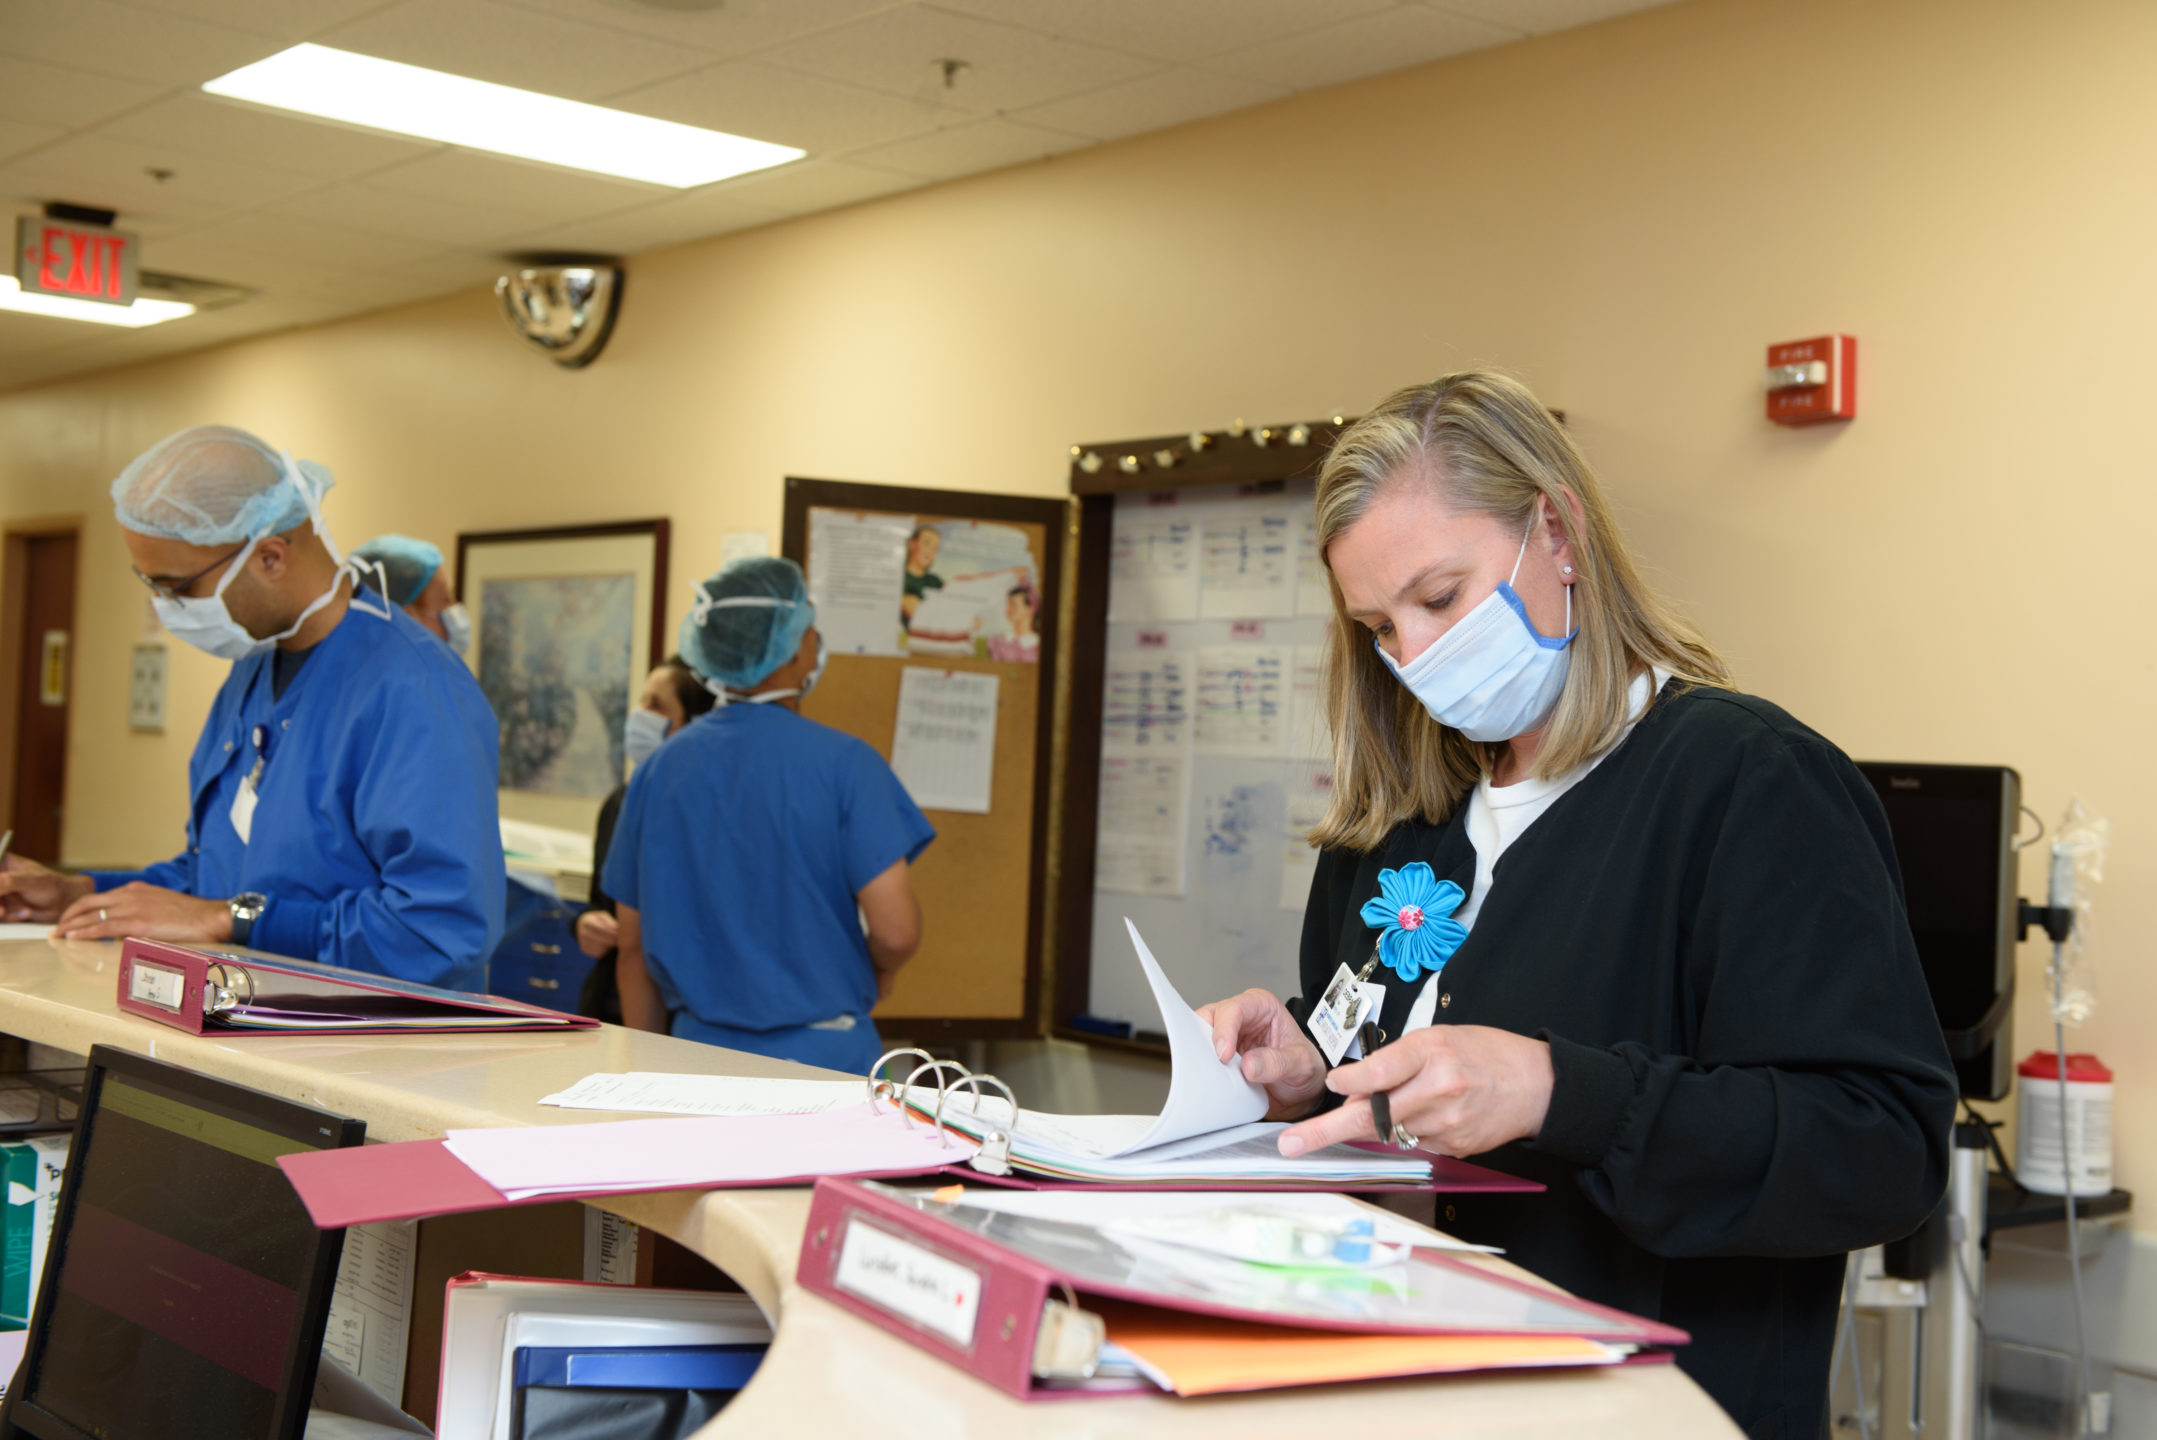 Staff members go through paperwork at a desk while others review schedules in the background. 